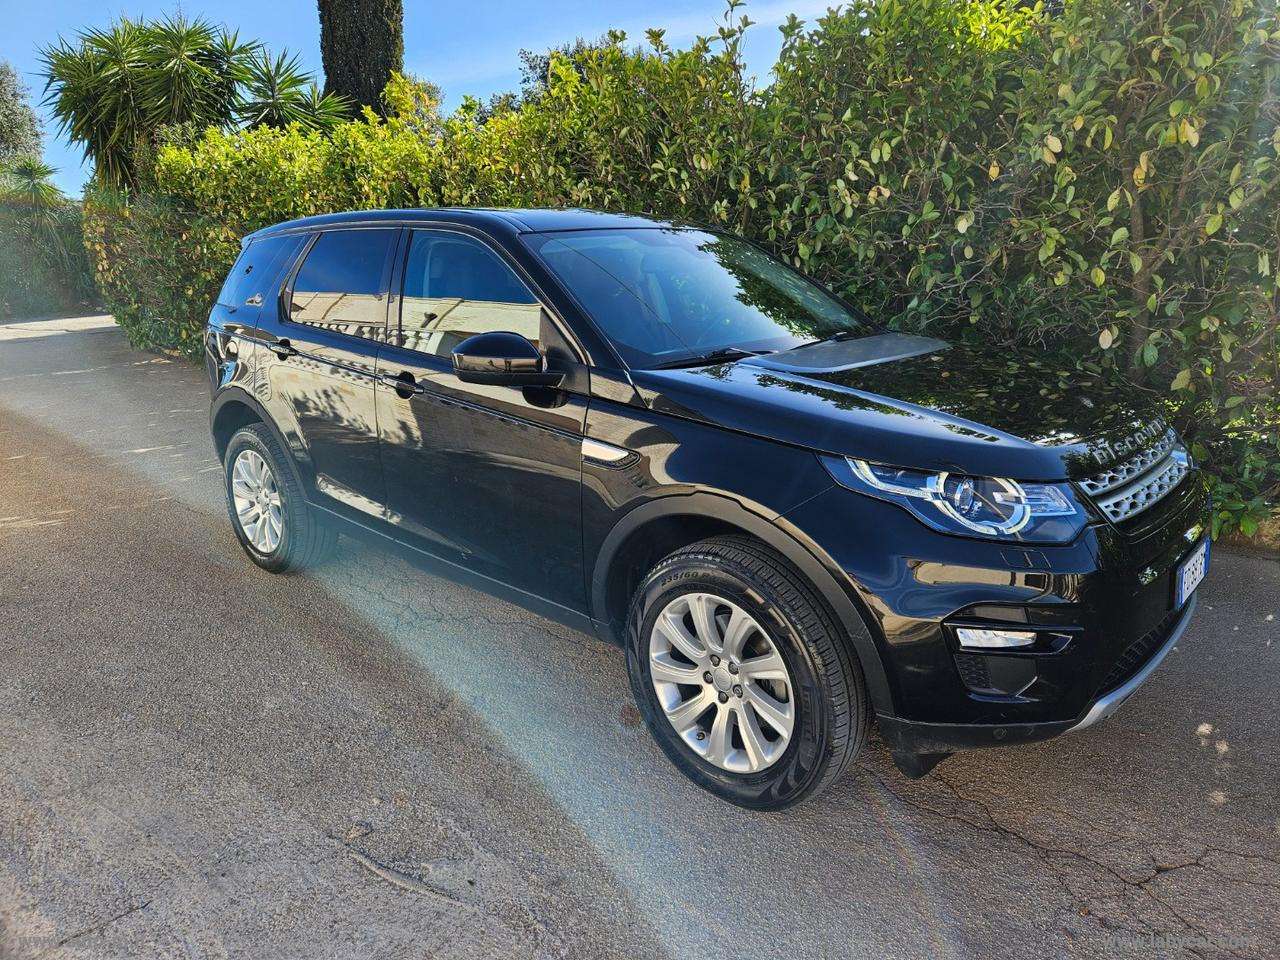 LAND ROVER Discovery Sport 2.0 TD4 150 Pr. Bus.Ed.